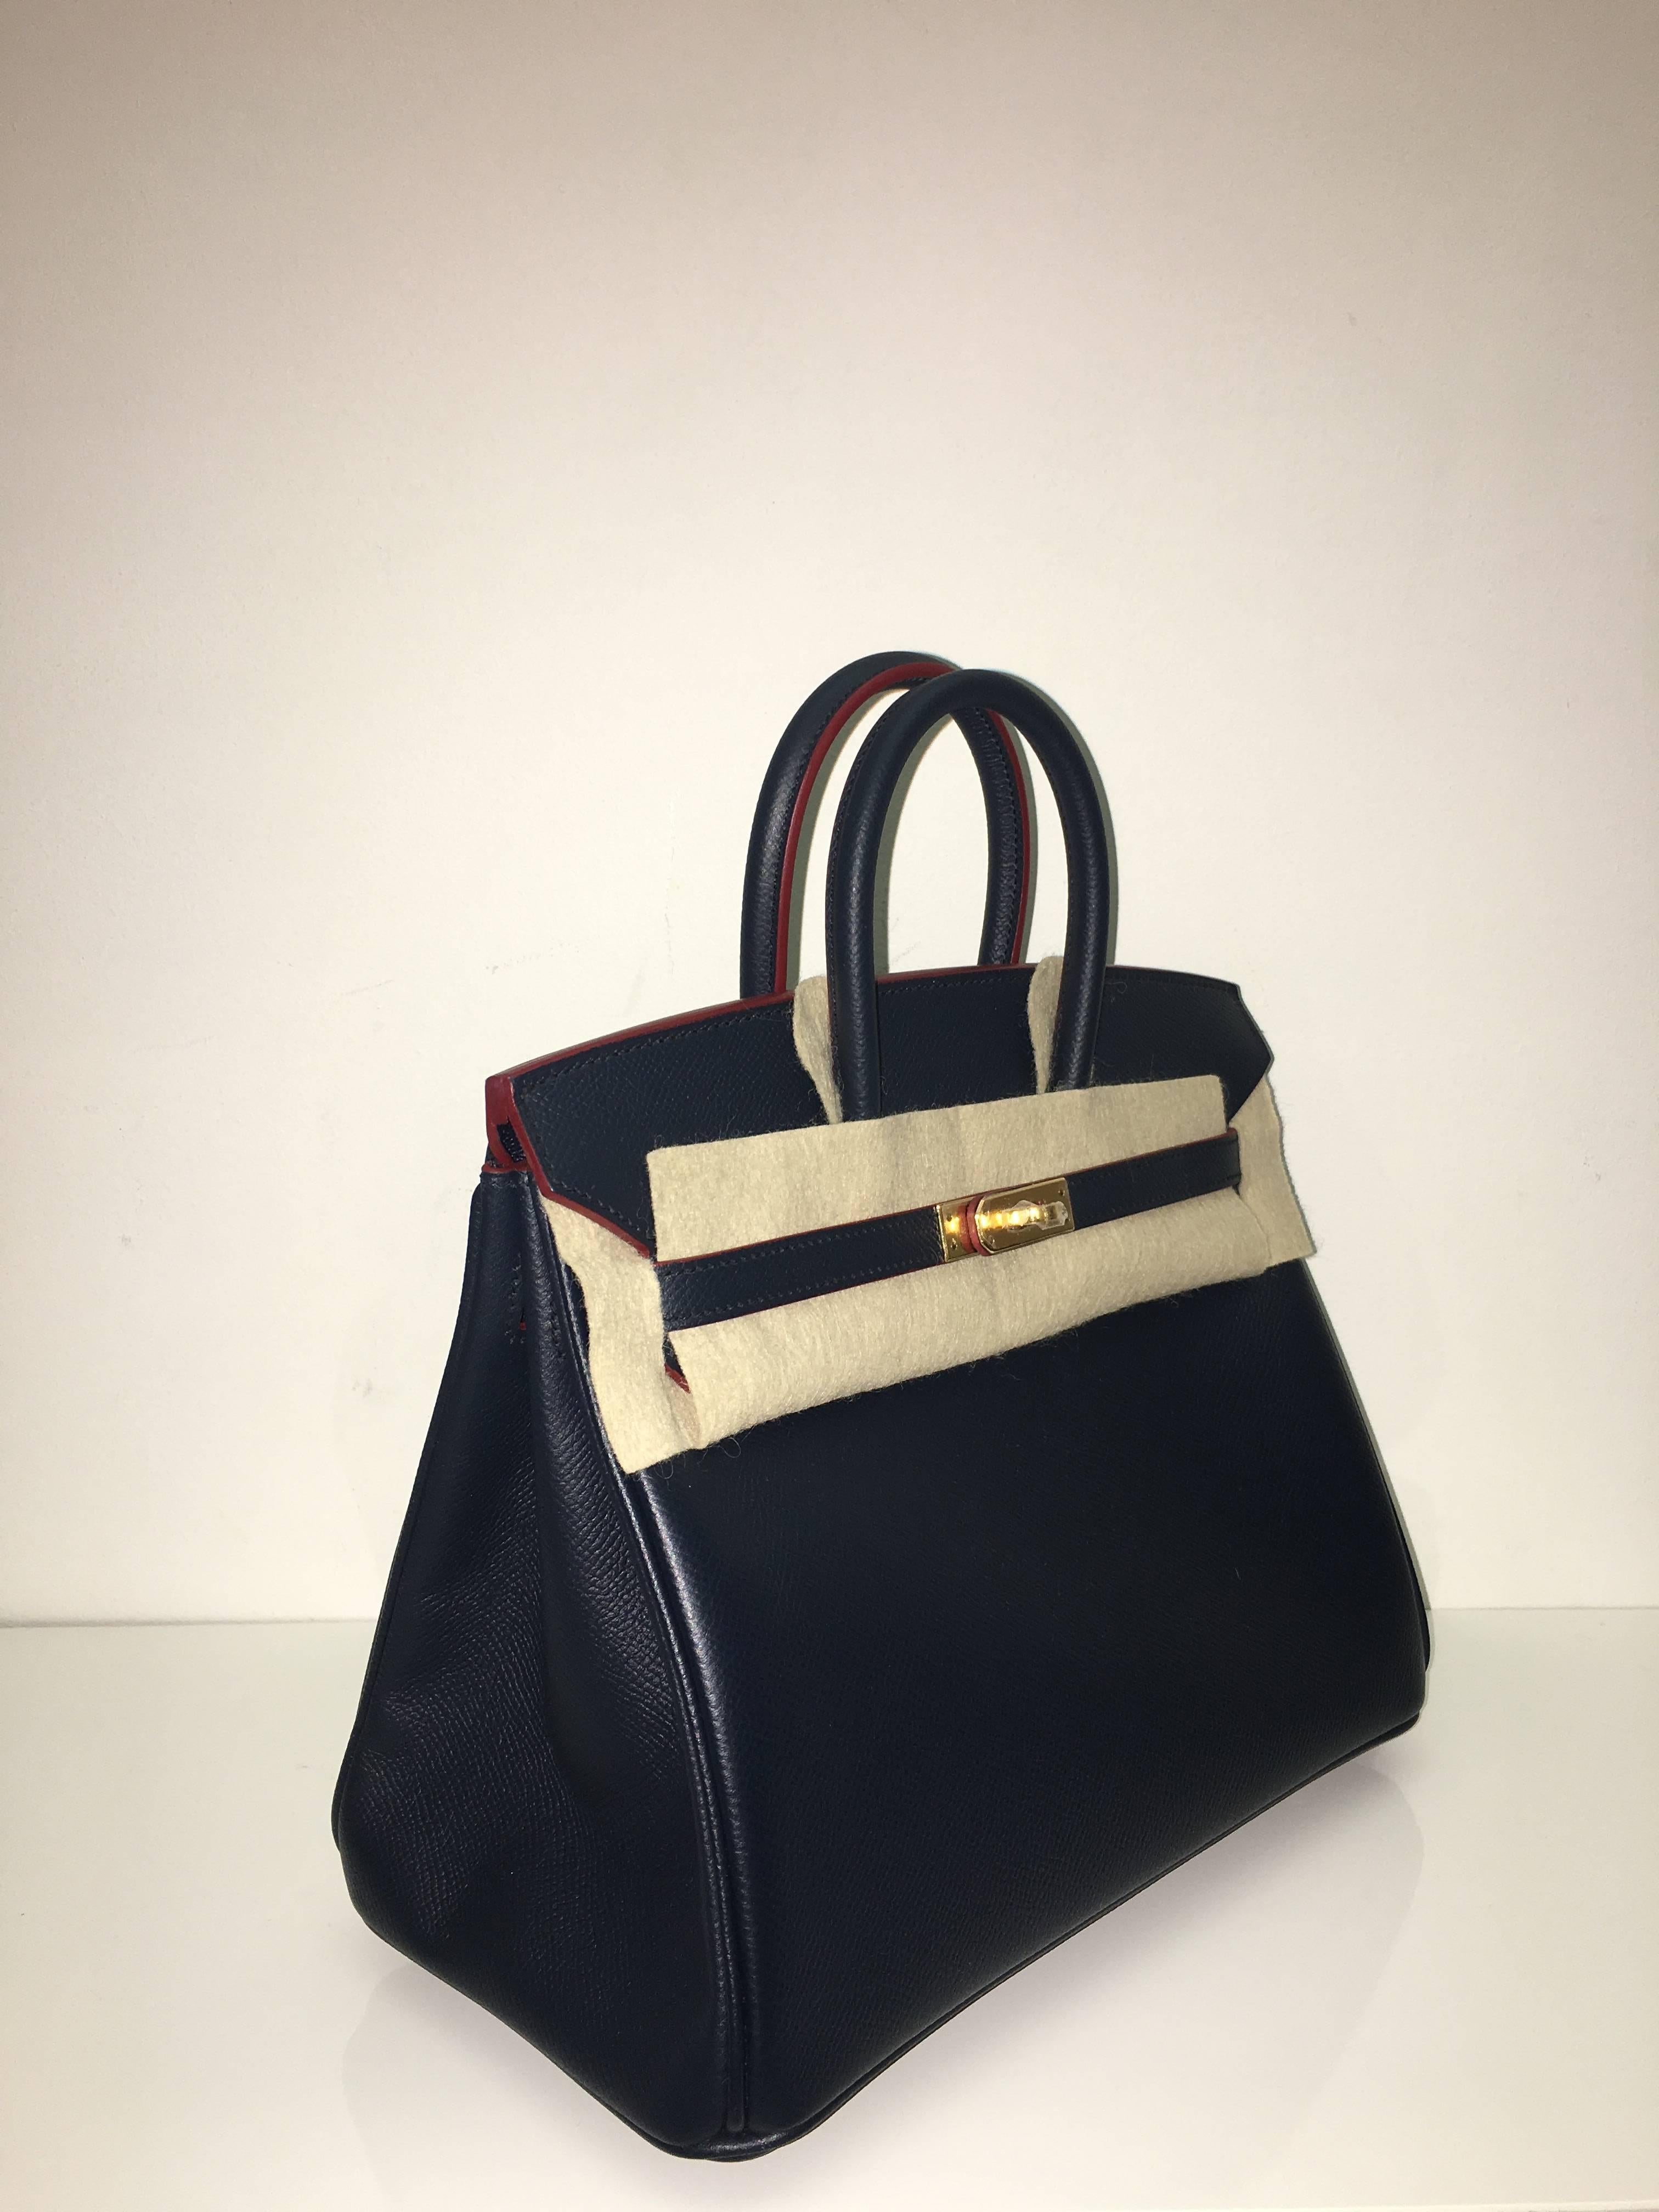 Hermes 
Birkin Size 30
Epsom Leather 
Color Blue Indigo/Rouge H Contour (Limited Edition)
Palladium (Silver) Hardware 
store fresh, comes with receipt and full set (dust bag, box...) 
Hydeparkfashion specializes in sourcing and delivering